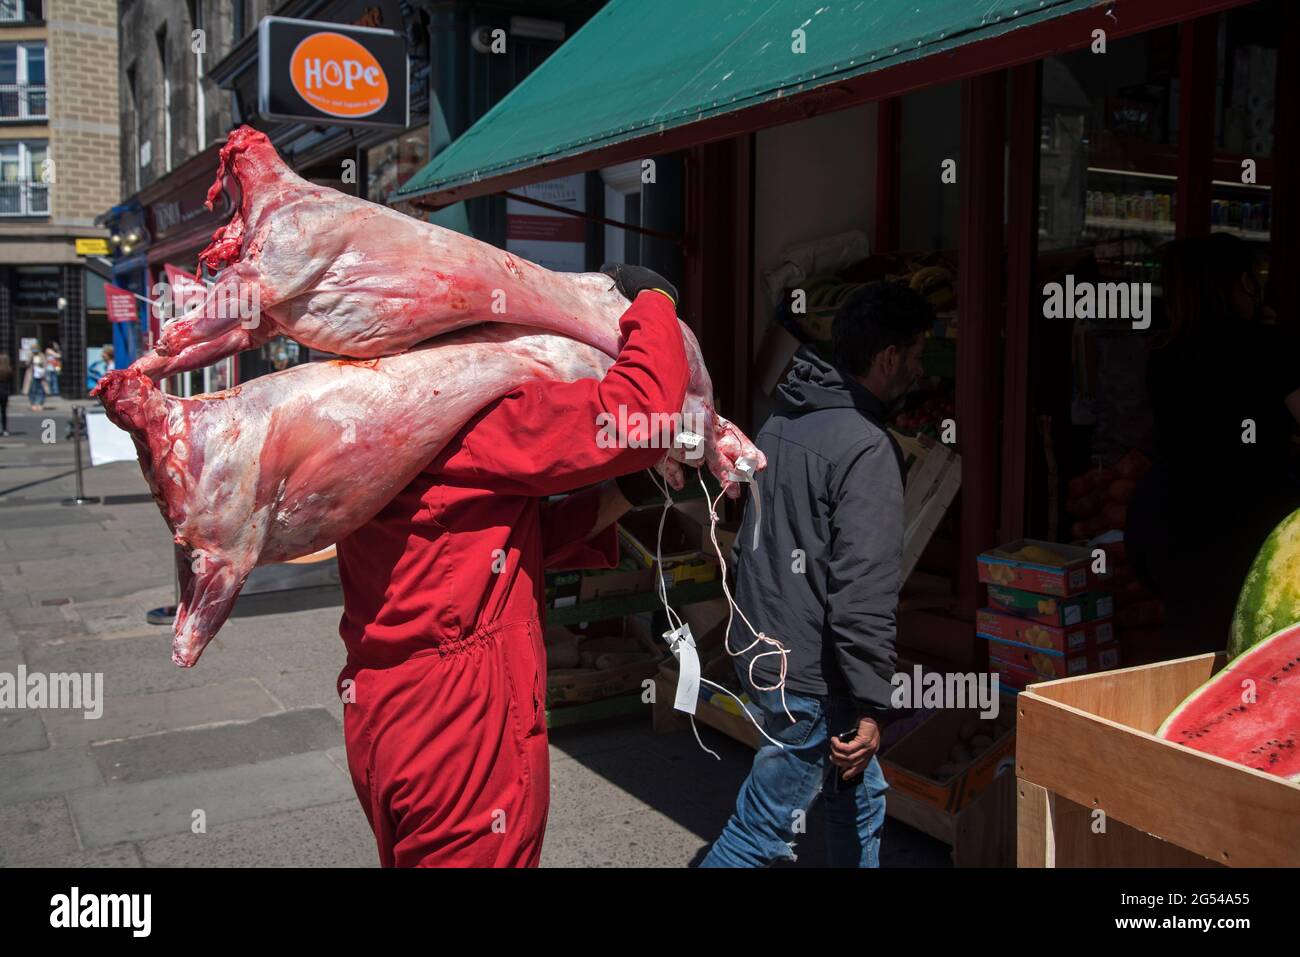 Sheep carcasses being delivered to an ethnic convenience store in Newington, Edinburgh, Scotland, UK. Stock Photo